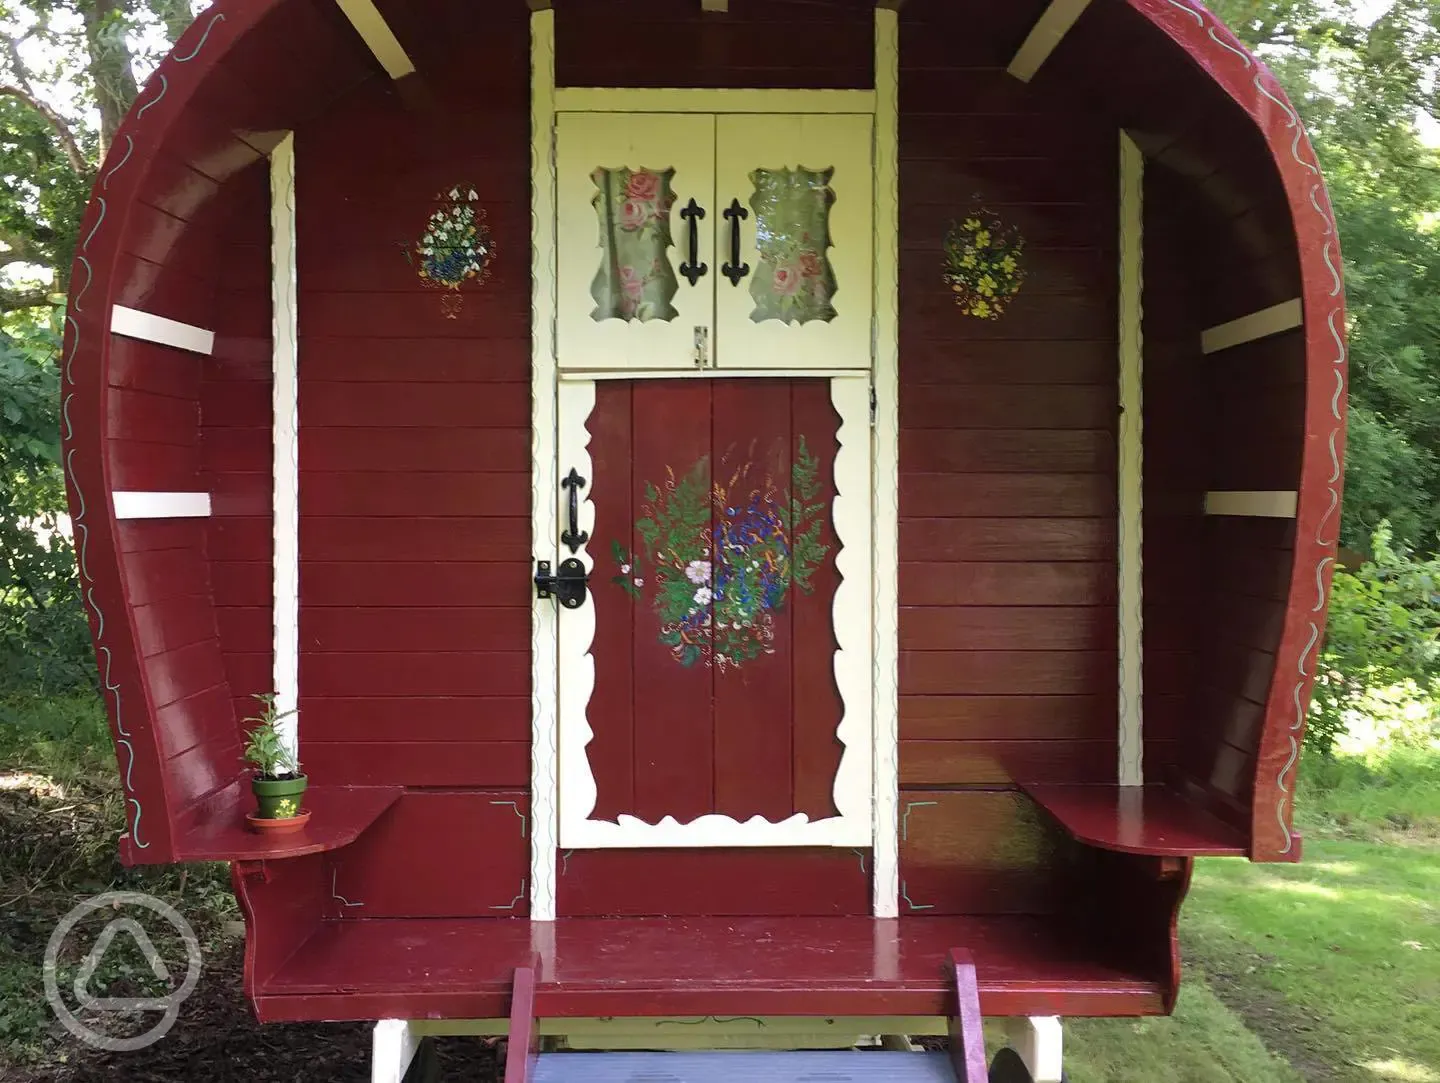 Gypsy caravan with beautiful art work of woodland flowers and chickens